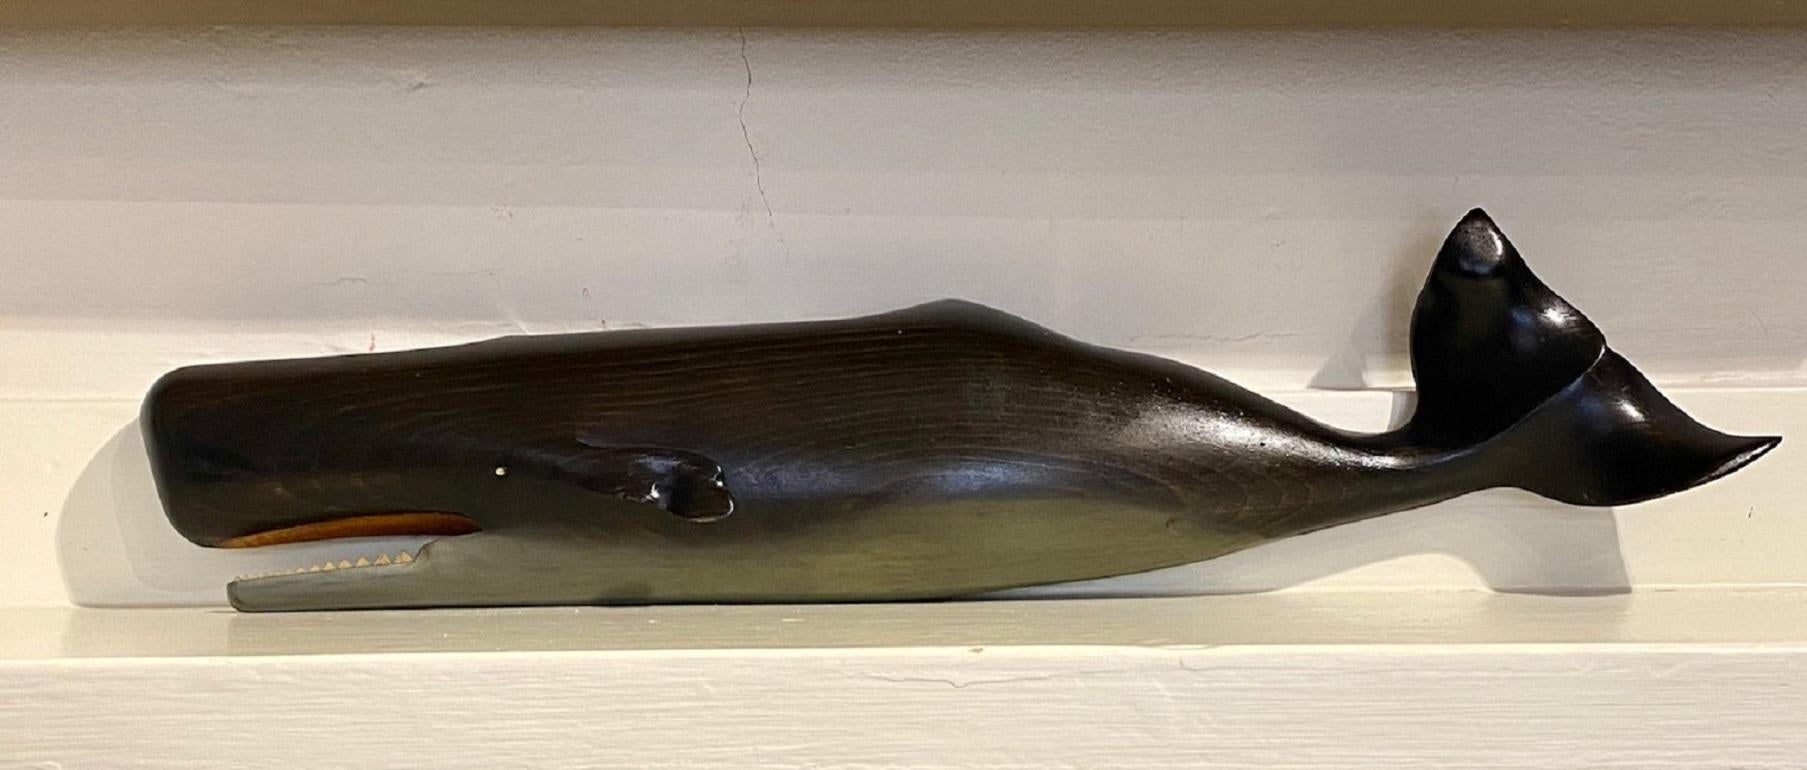 Vintage carved and polychromed wooden sperm whale by M. Gracie, South Dartmouth, MA, 1976, a skillfully carved sperm whale half-plaque, with open mouth exposing the lower jaw of teeth, and very gracefully curled flukes on the tail, signed and dated